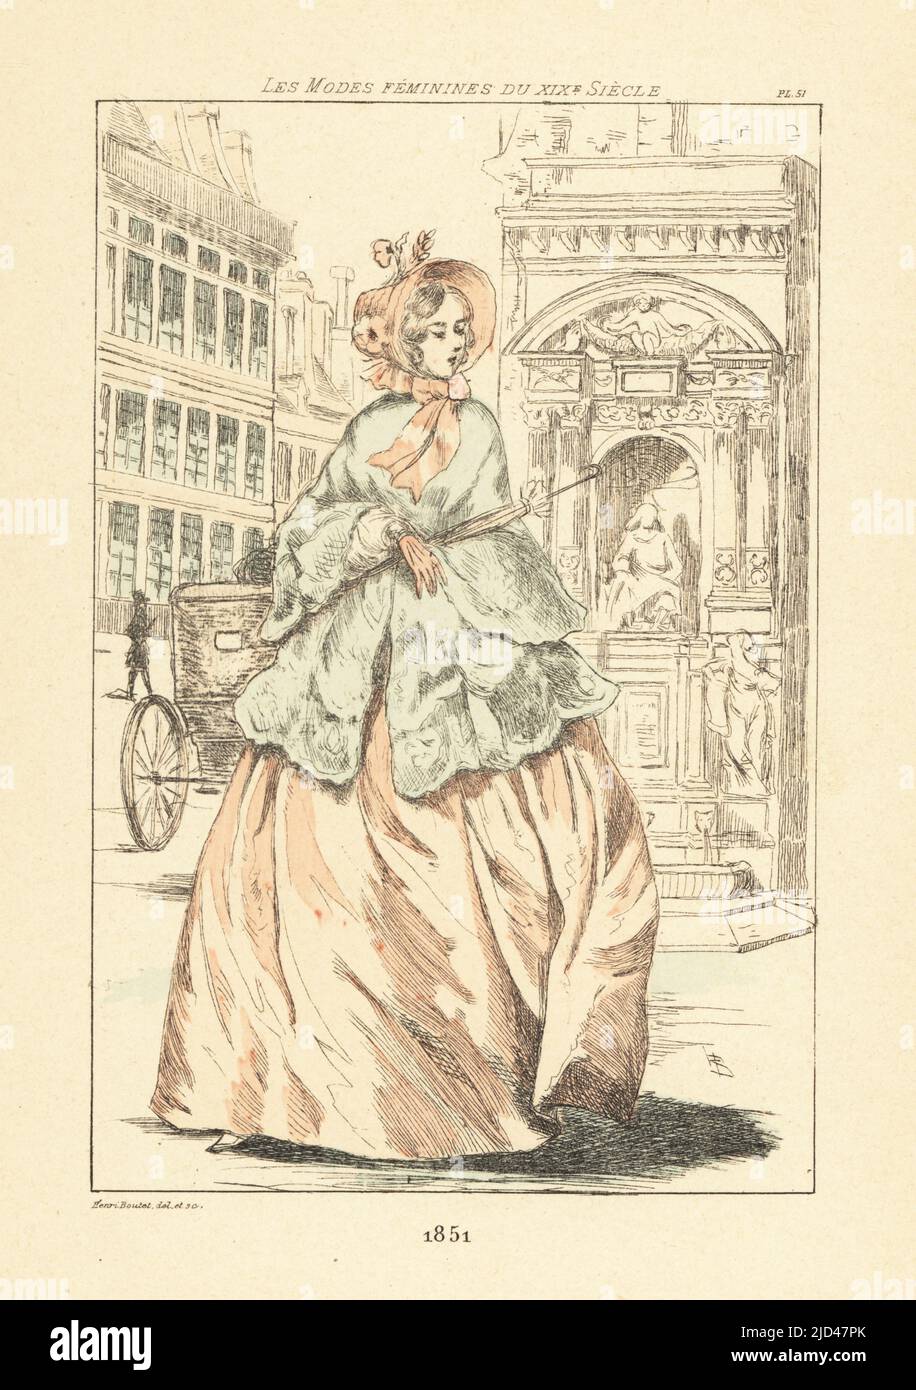 Fashionable woman at the Fontaine Moliere, rue Moliere, Paris, 1851. The fountain was erected by architect Louis Tullius Visconti with a statue by Bernard Gabriel Seurre and two allegorical figures, in 1844. Handcoloured drypoint or pointe-seche etching by Henri Boutet from Les Modes Feminines du XIXeme Siecle (Female Fashions of the 19th Century), Ernest Flammarion, Paris, 1902. Boutet (1851-1919) was a French artist, engraver, lithographer and designer. Stock Photo